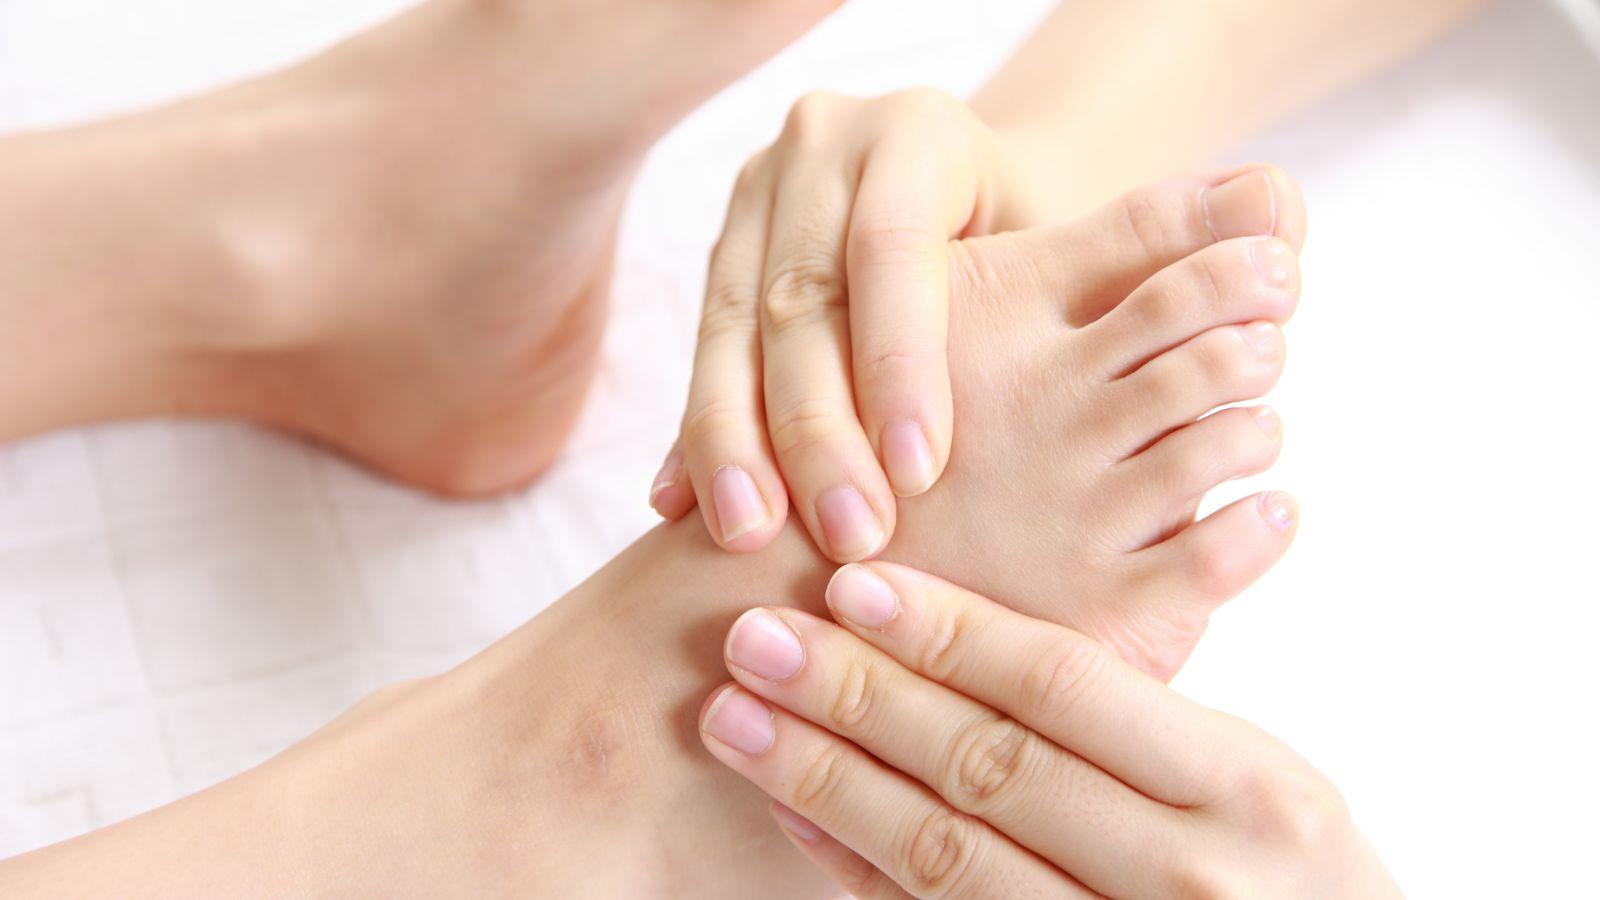 massage, reflexology or reiki which treatment should I pick? image of a pair of hands giving reflexology.